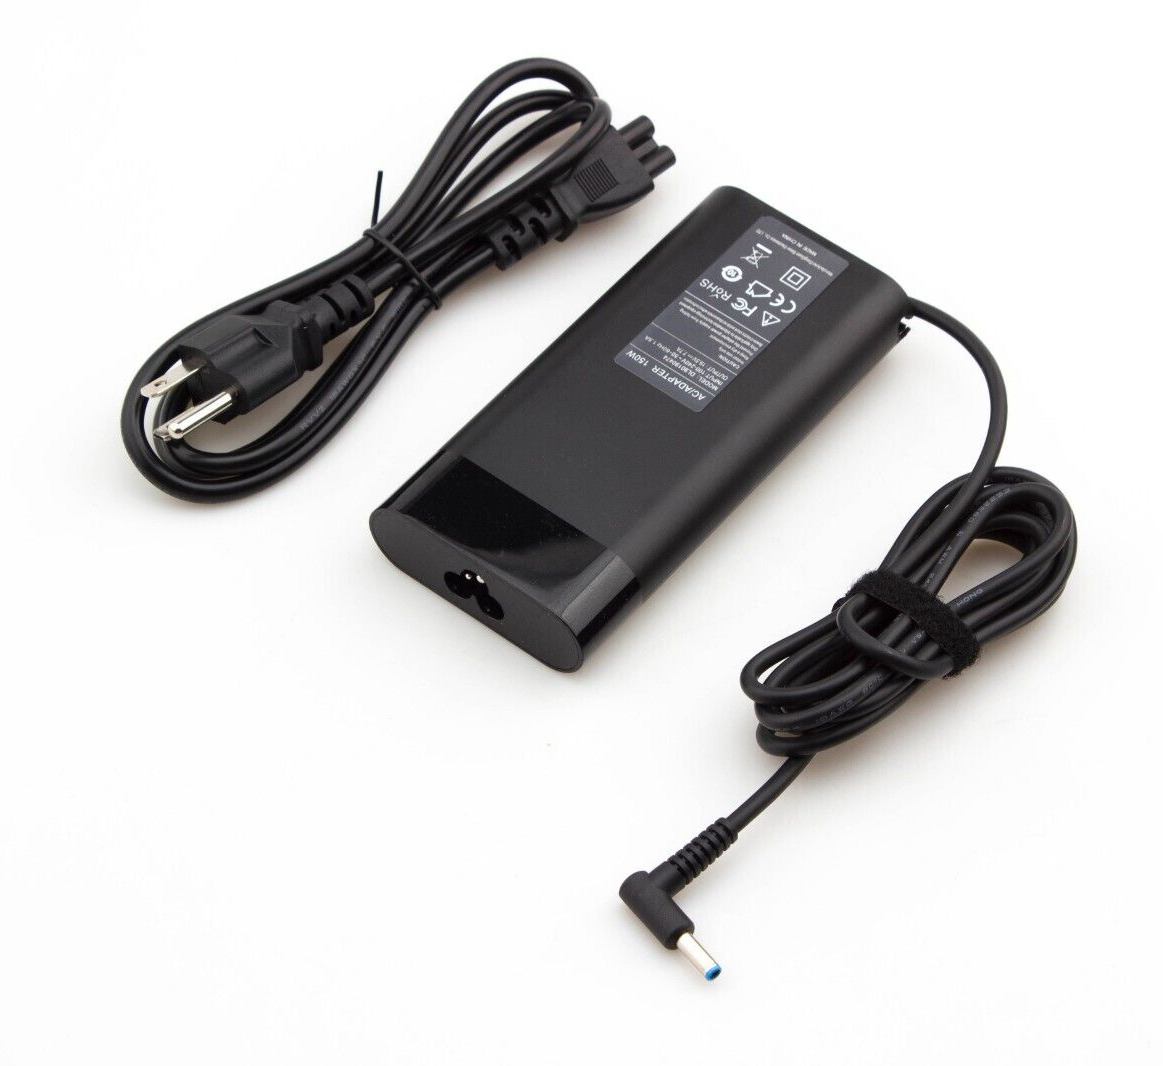 150W 7.7A charger power adapter suitable for HP Laptop/Zbook 15 G3 G4 G5 G6